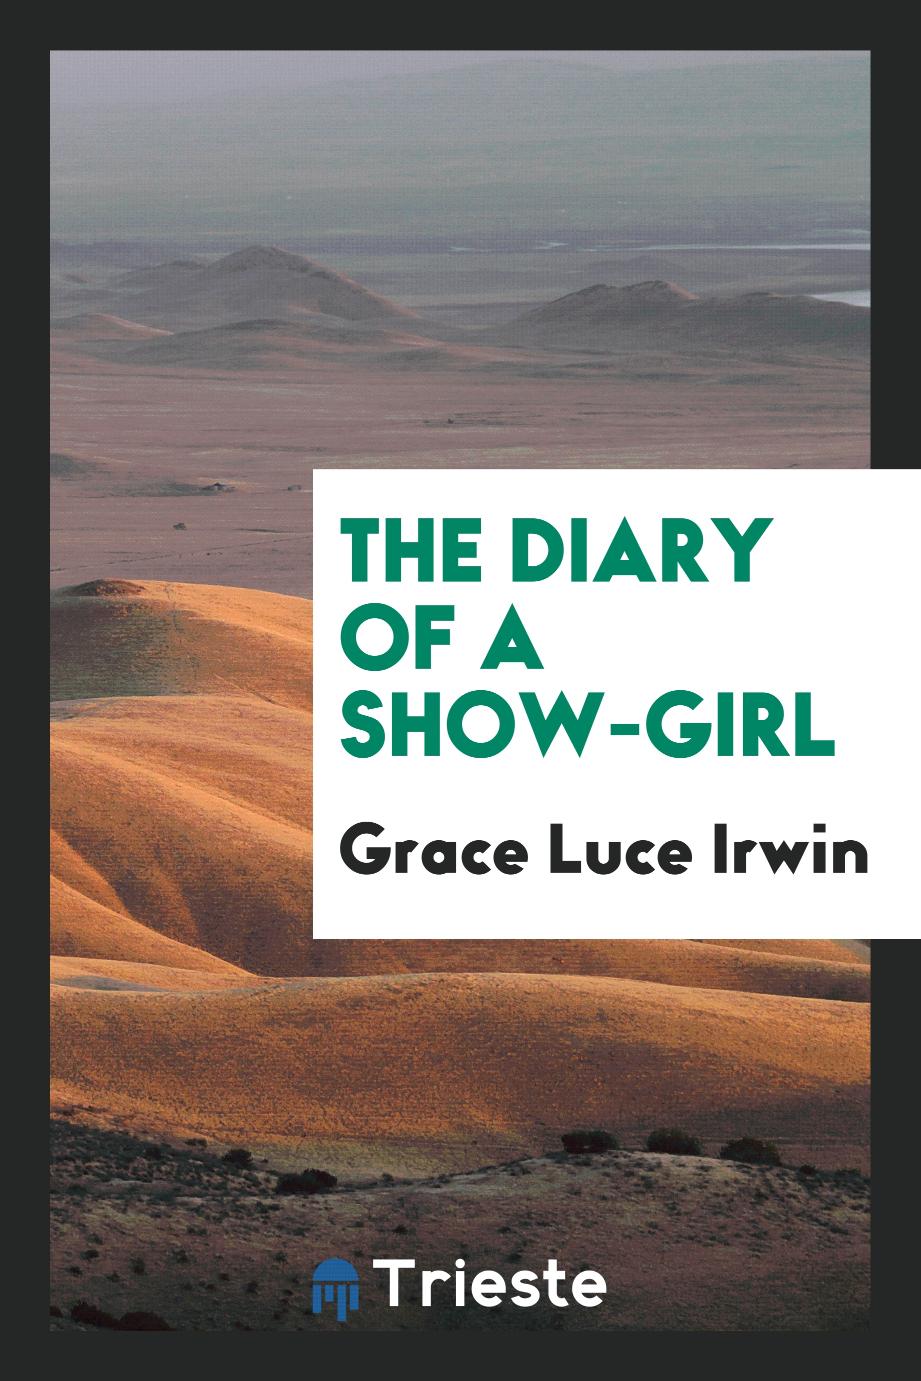 The diary of a show-girl